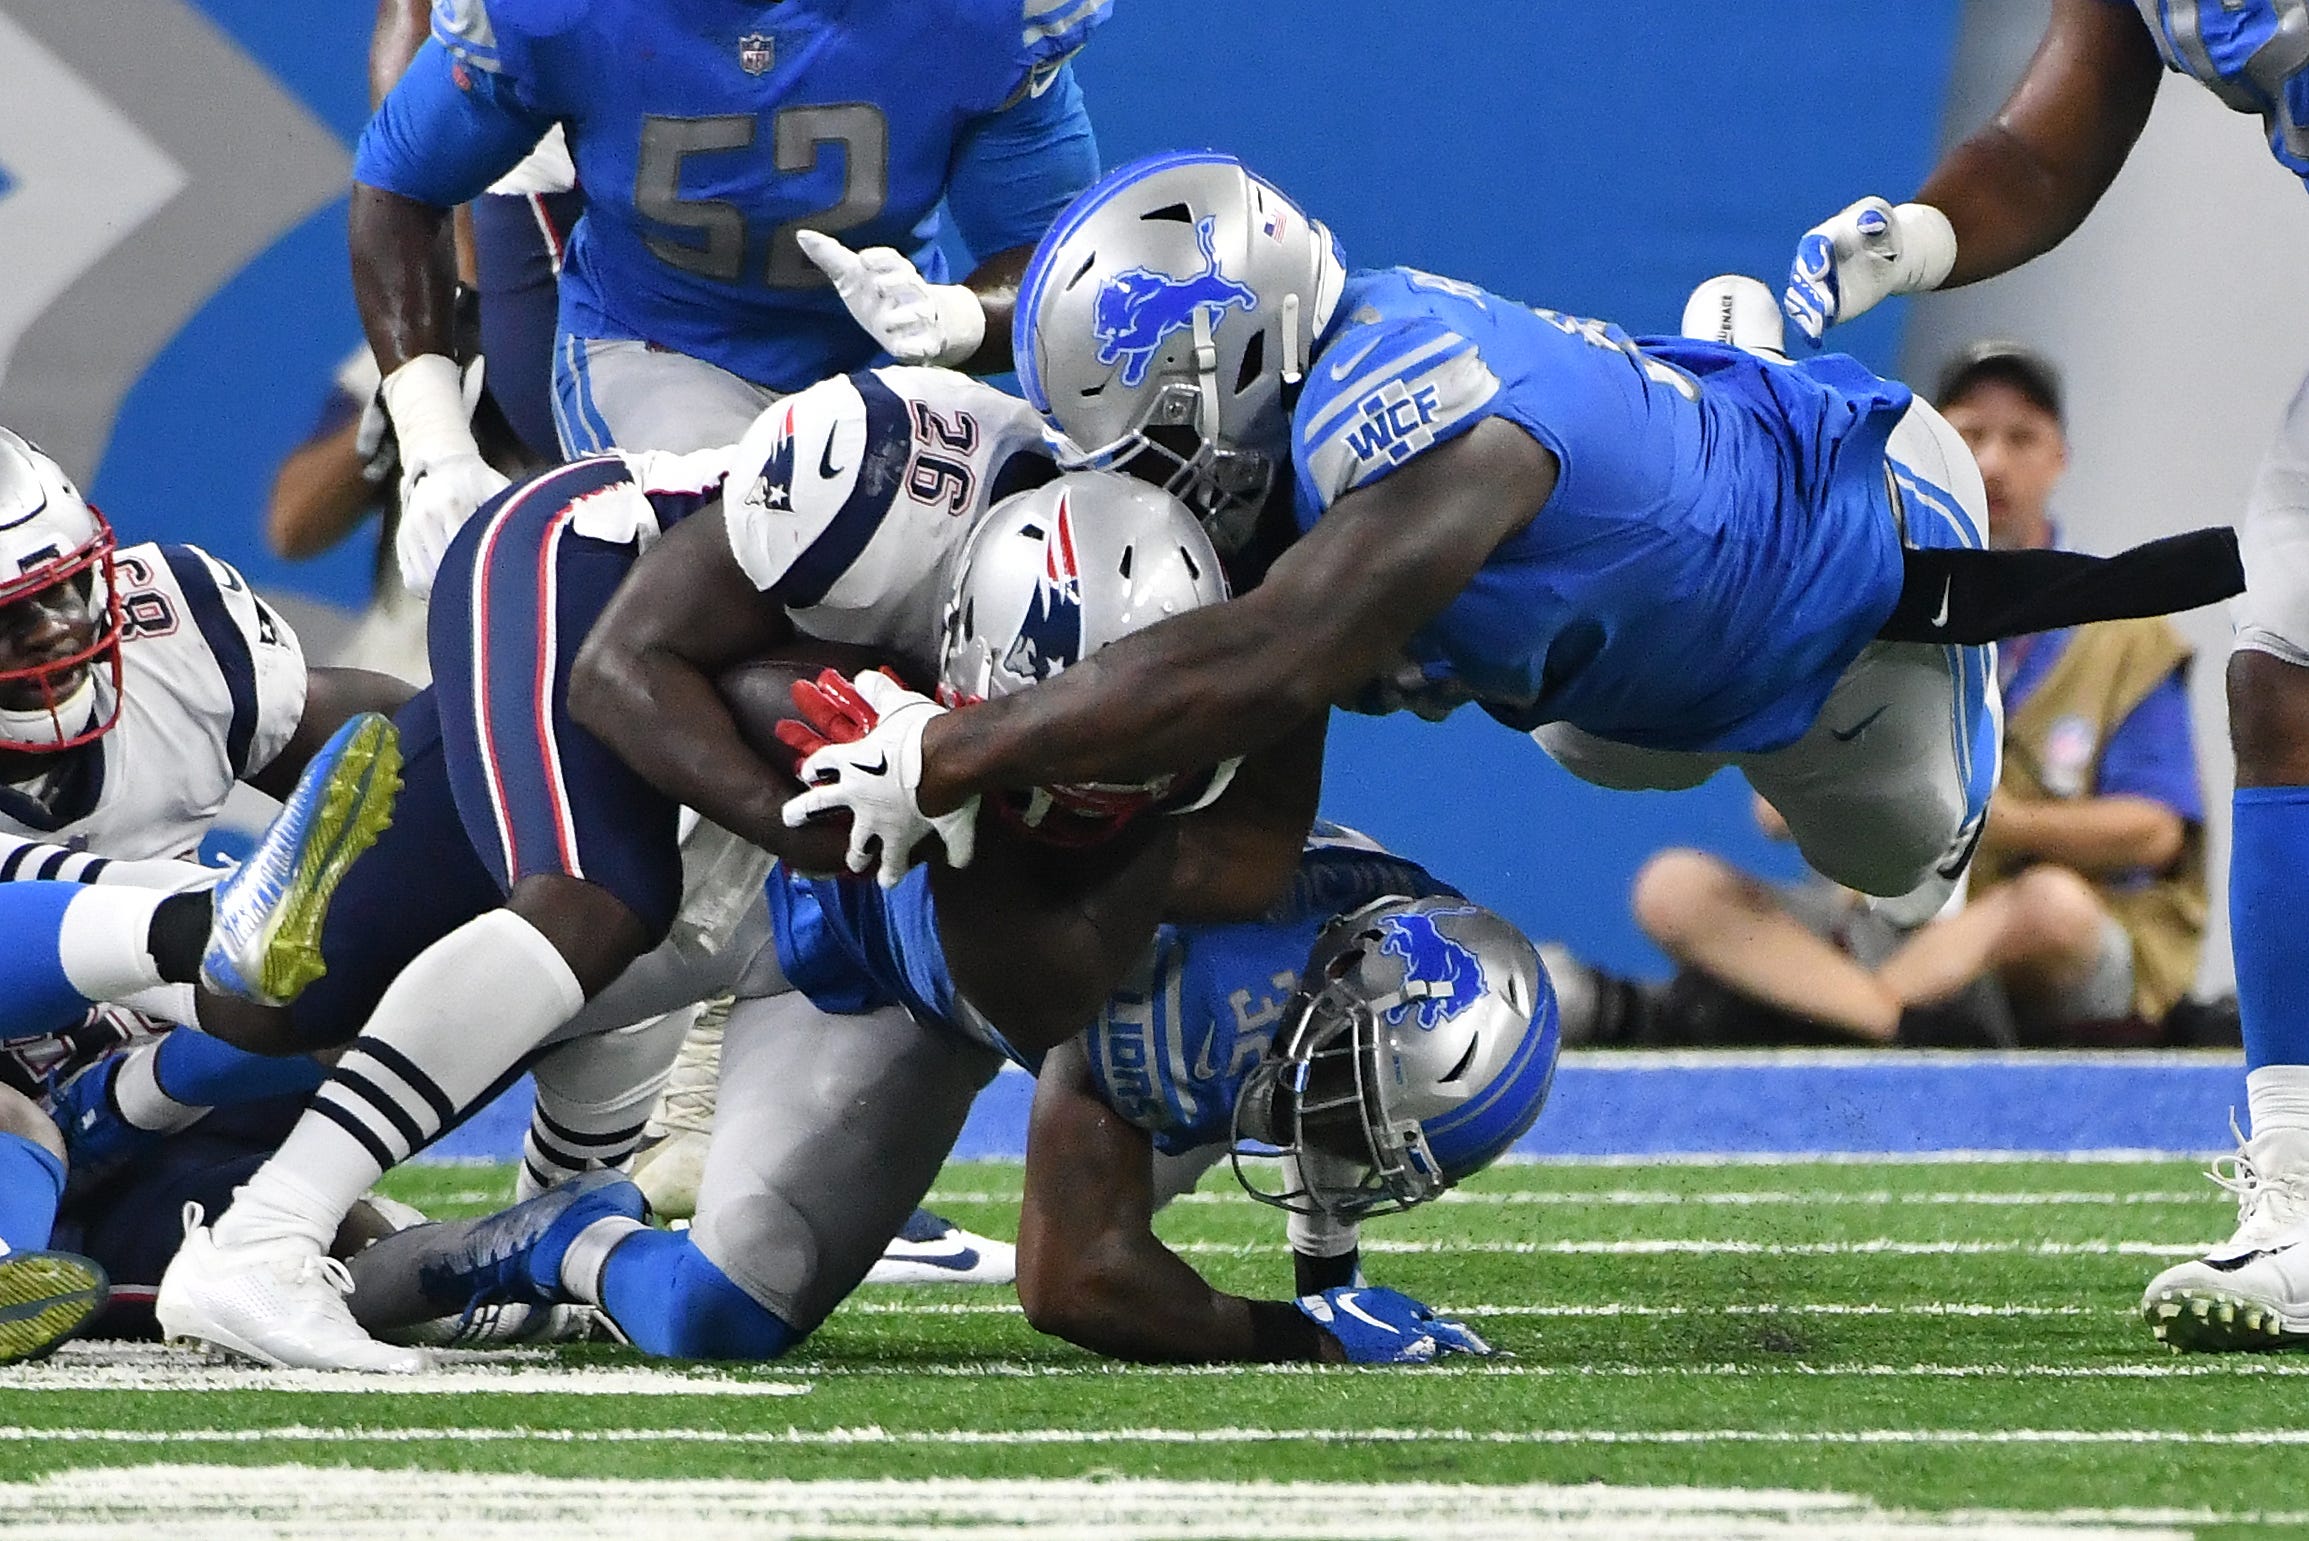 Lions Tavon Wilson and A ' Shawn Robinson stop Patriots ' Sony Michel from making a first down on third-and-1 in the second quarter.